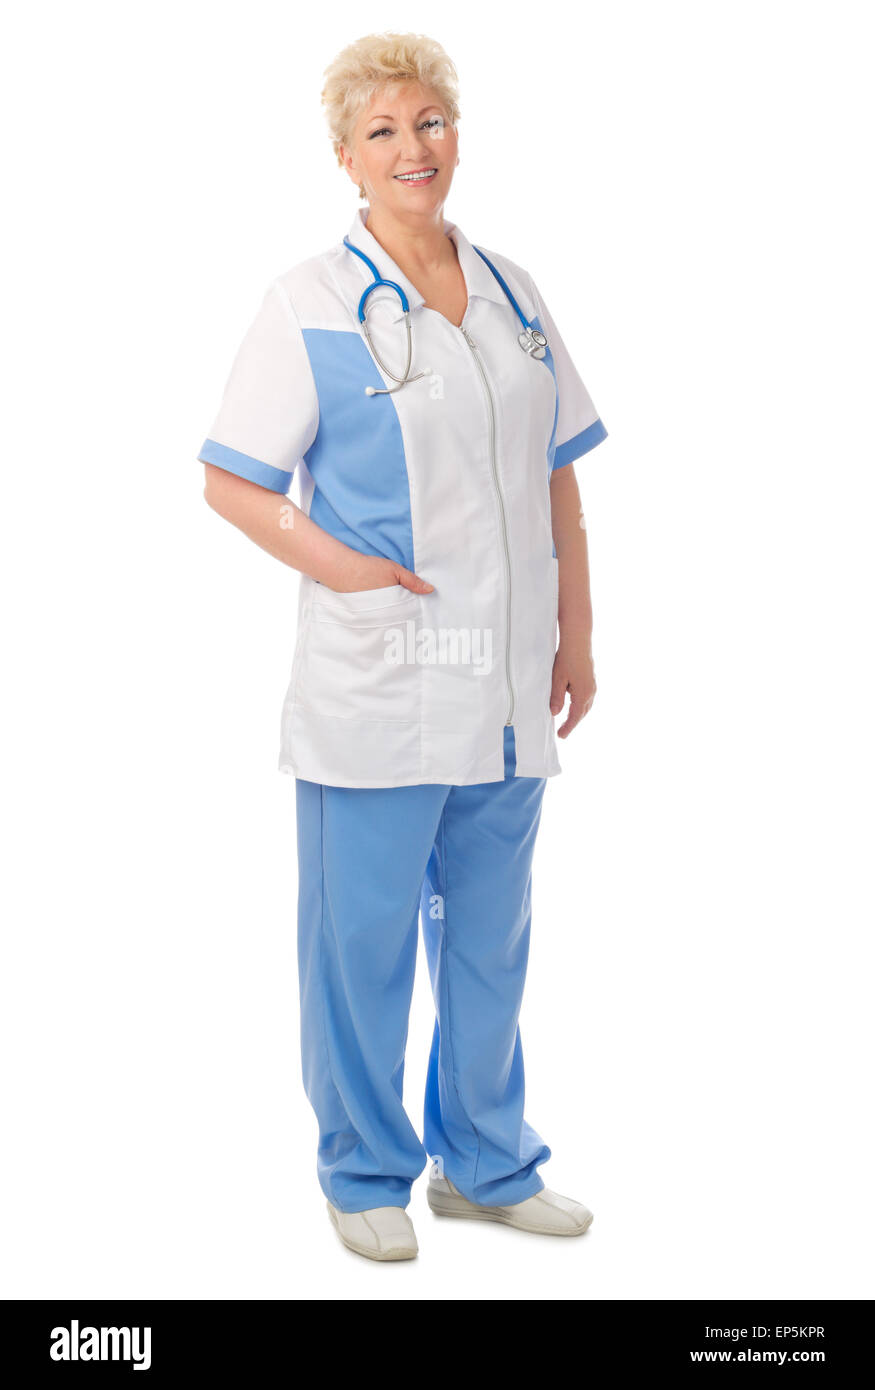 Smiling mature doctor with stethoscope isolated Stock Photo